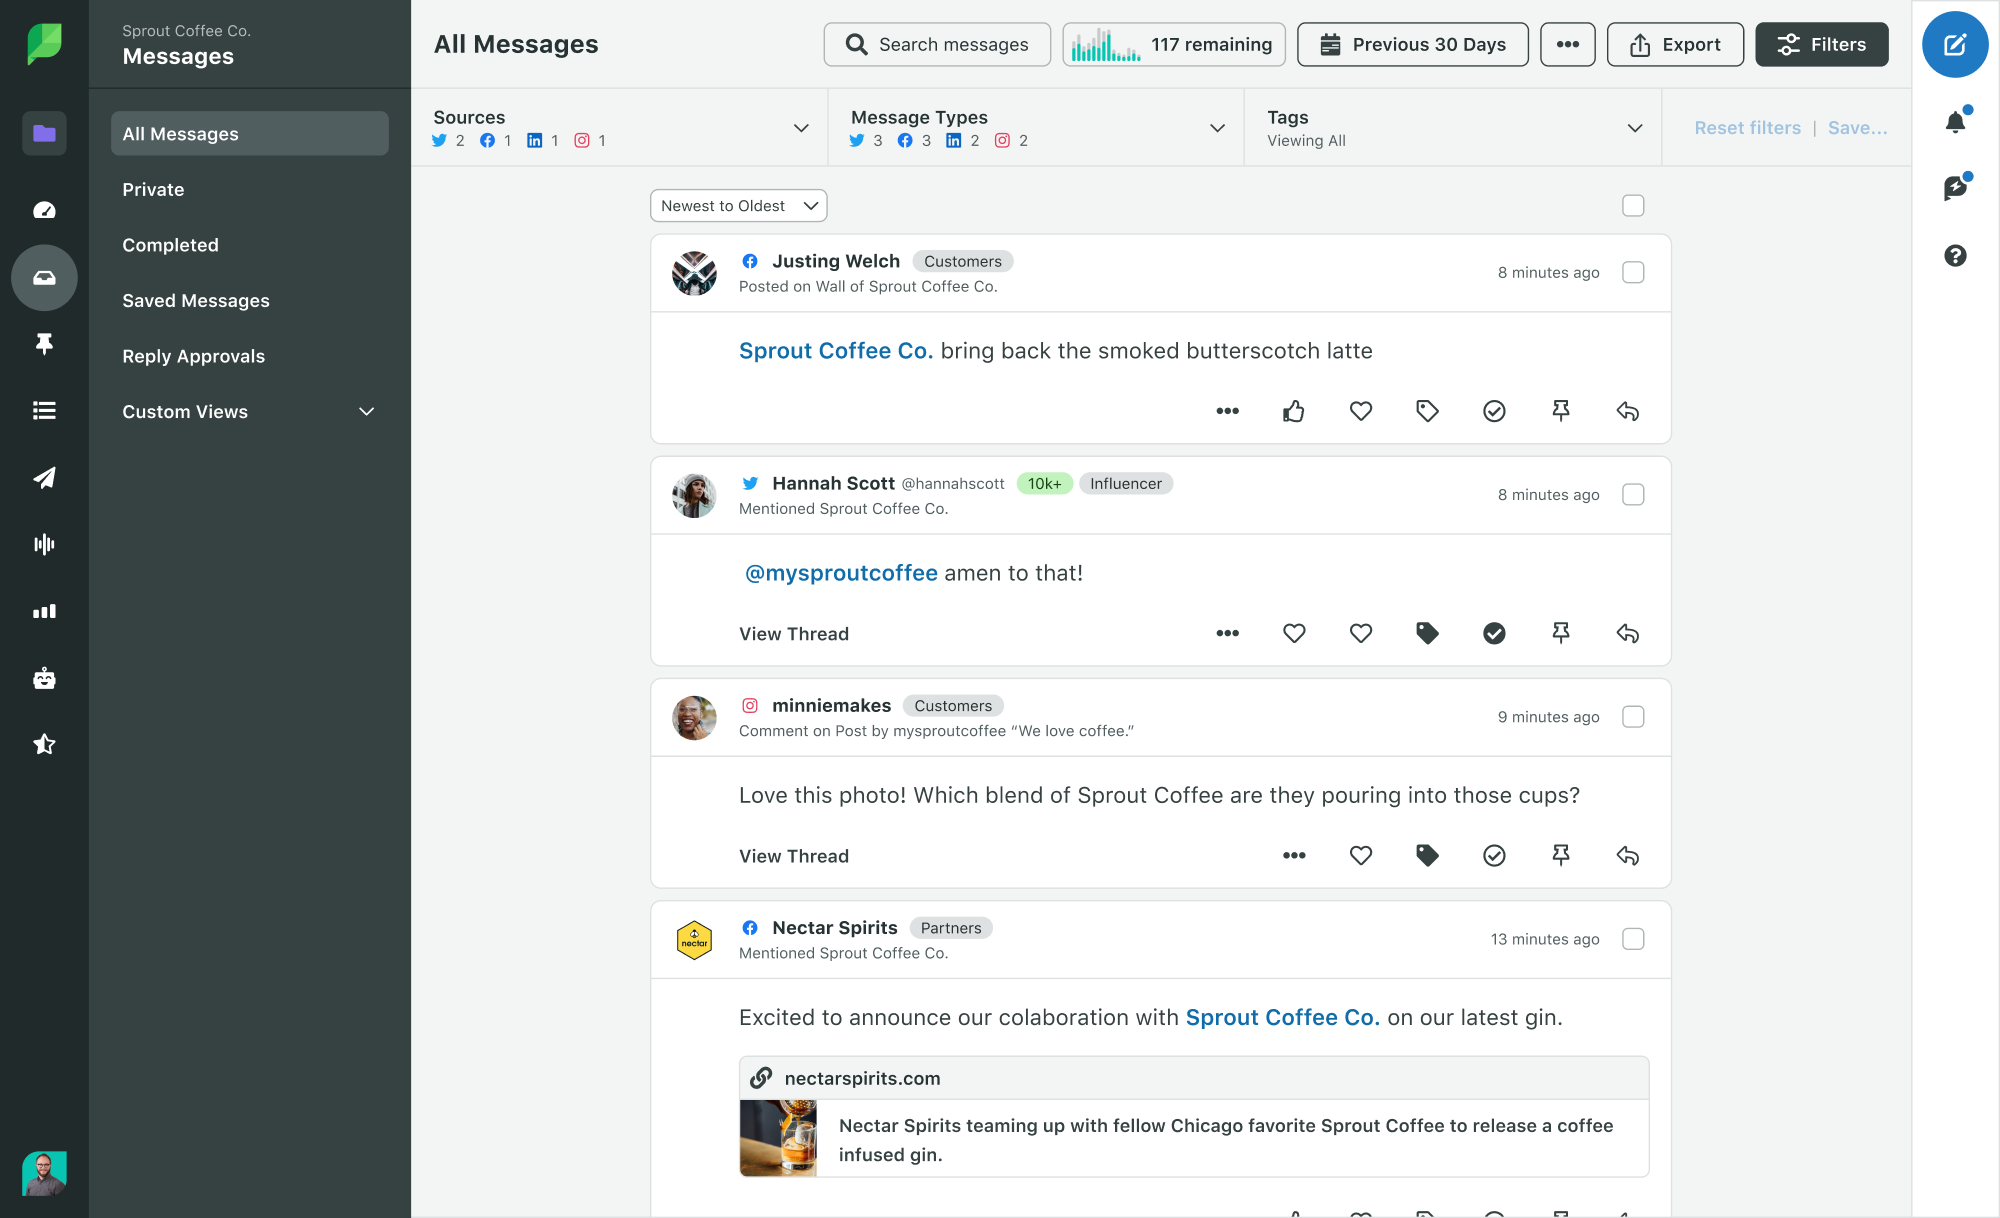 A screenshot of Sprout Social's Smart Inbox tool displaying messages from multiple social platforms in one feed.